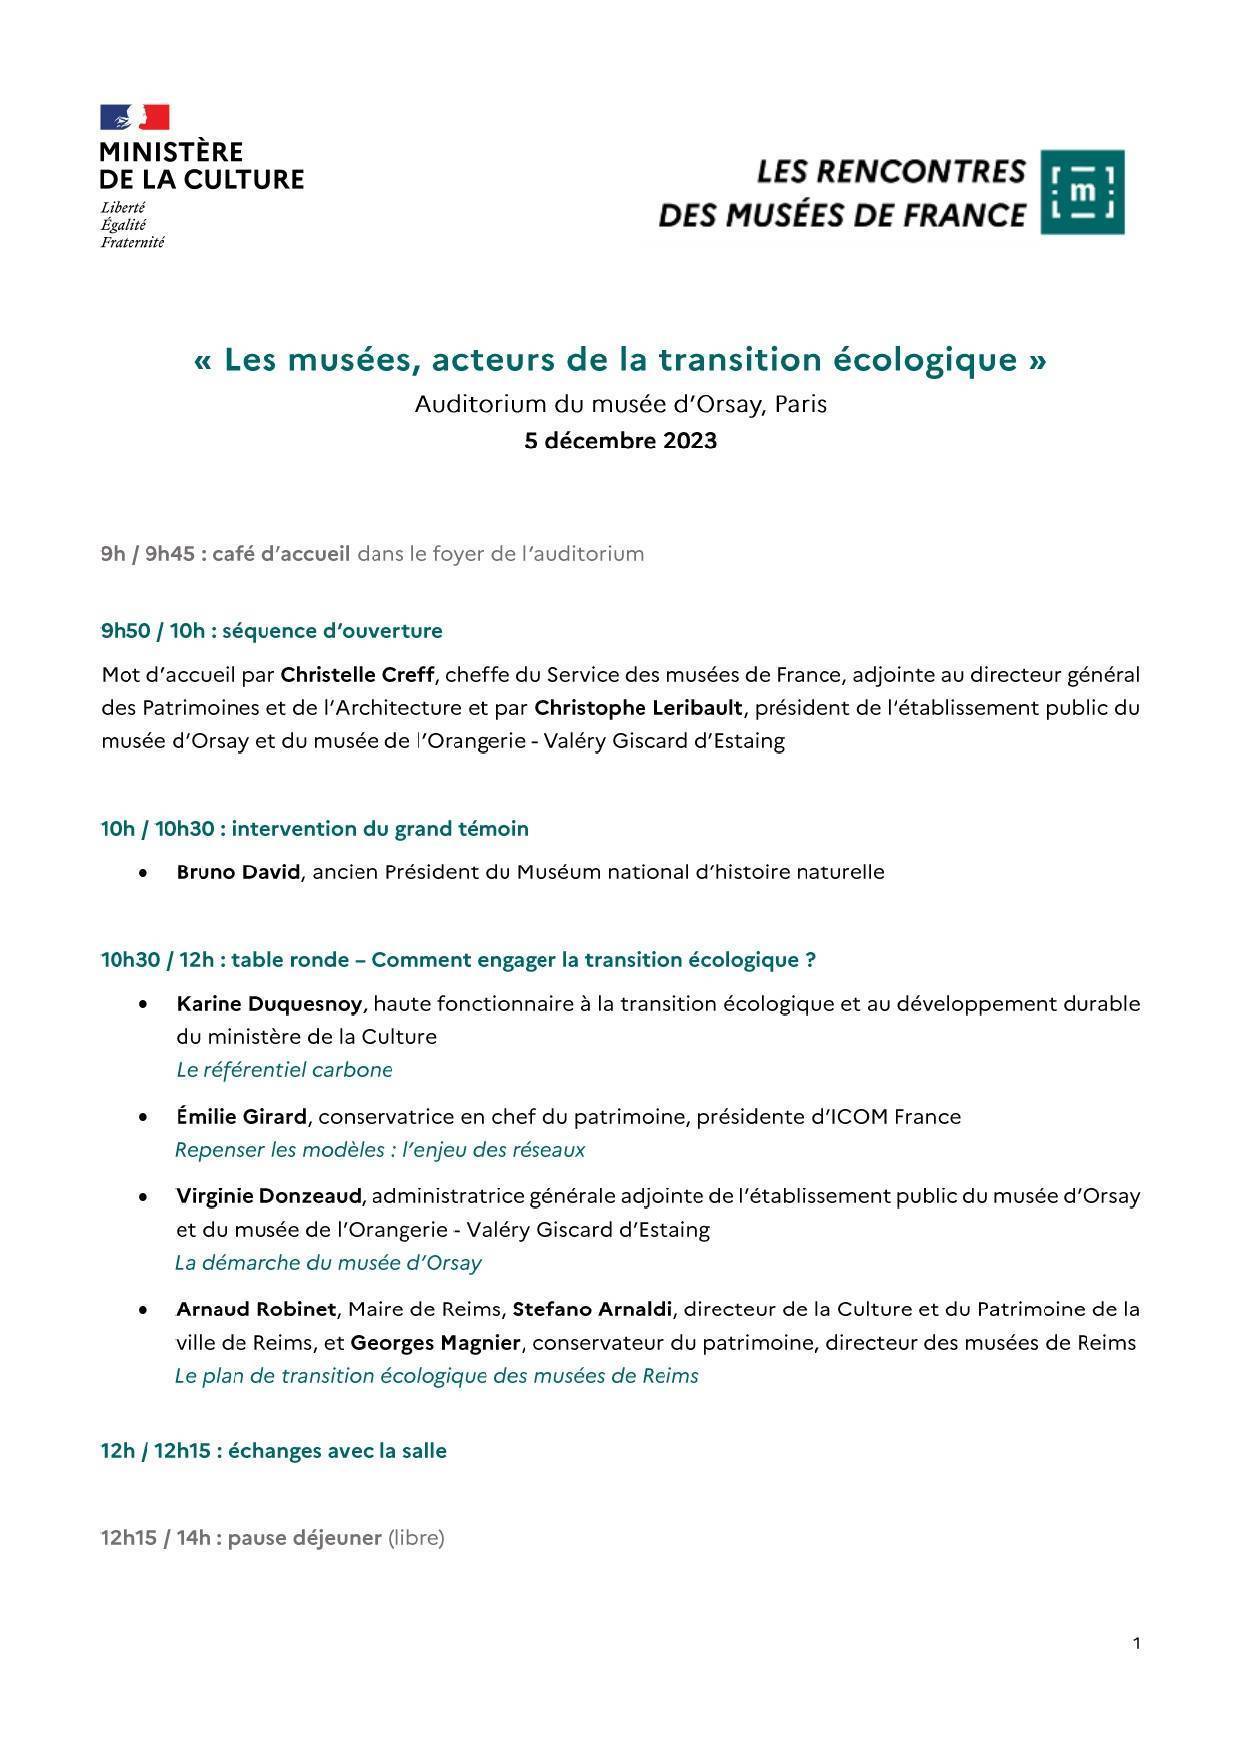 Programme_Rencontres MdF 2023 - VD_20231201_page-0001.jpg